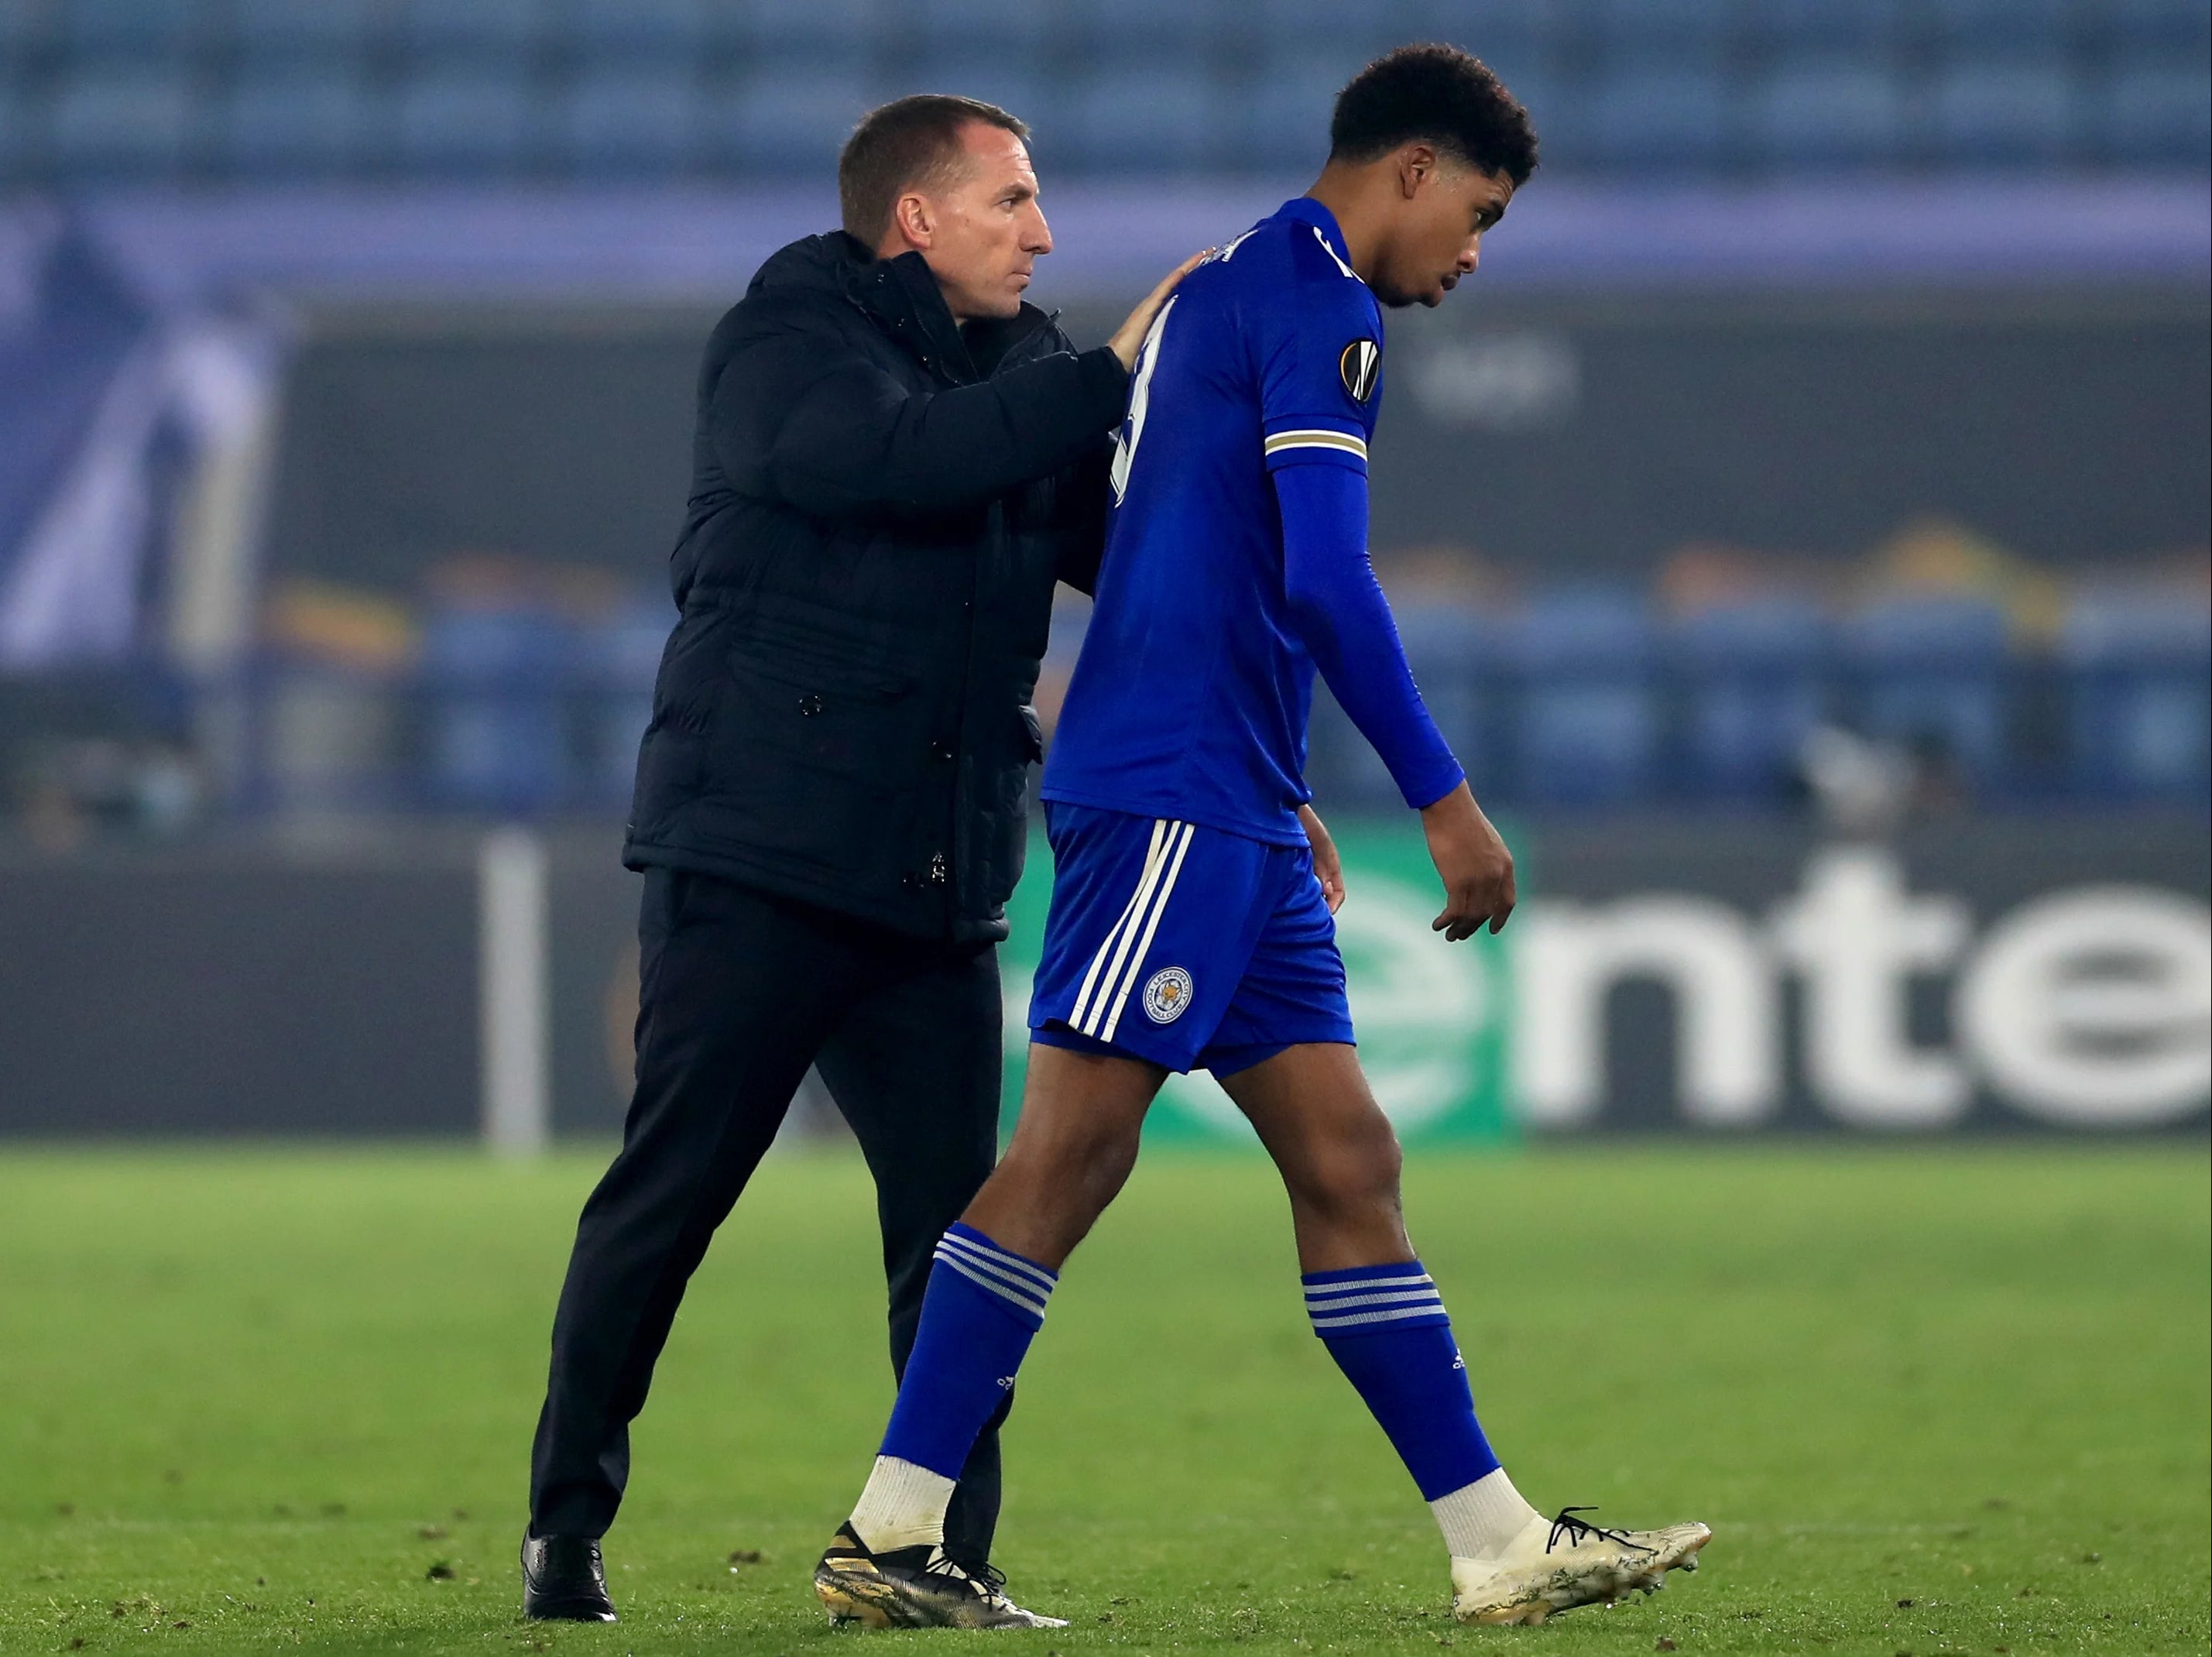 Leicester City manager Brendan Rodgers, left, expects Wesley Fofana, right, to stay with the club